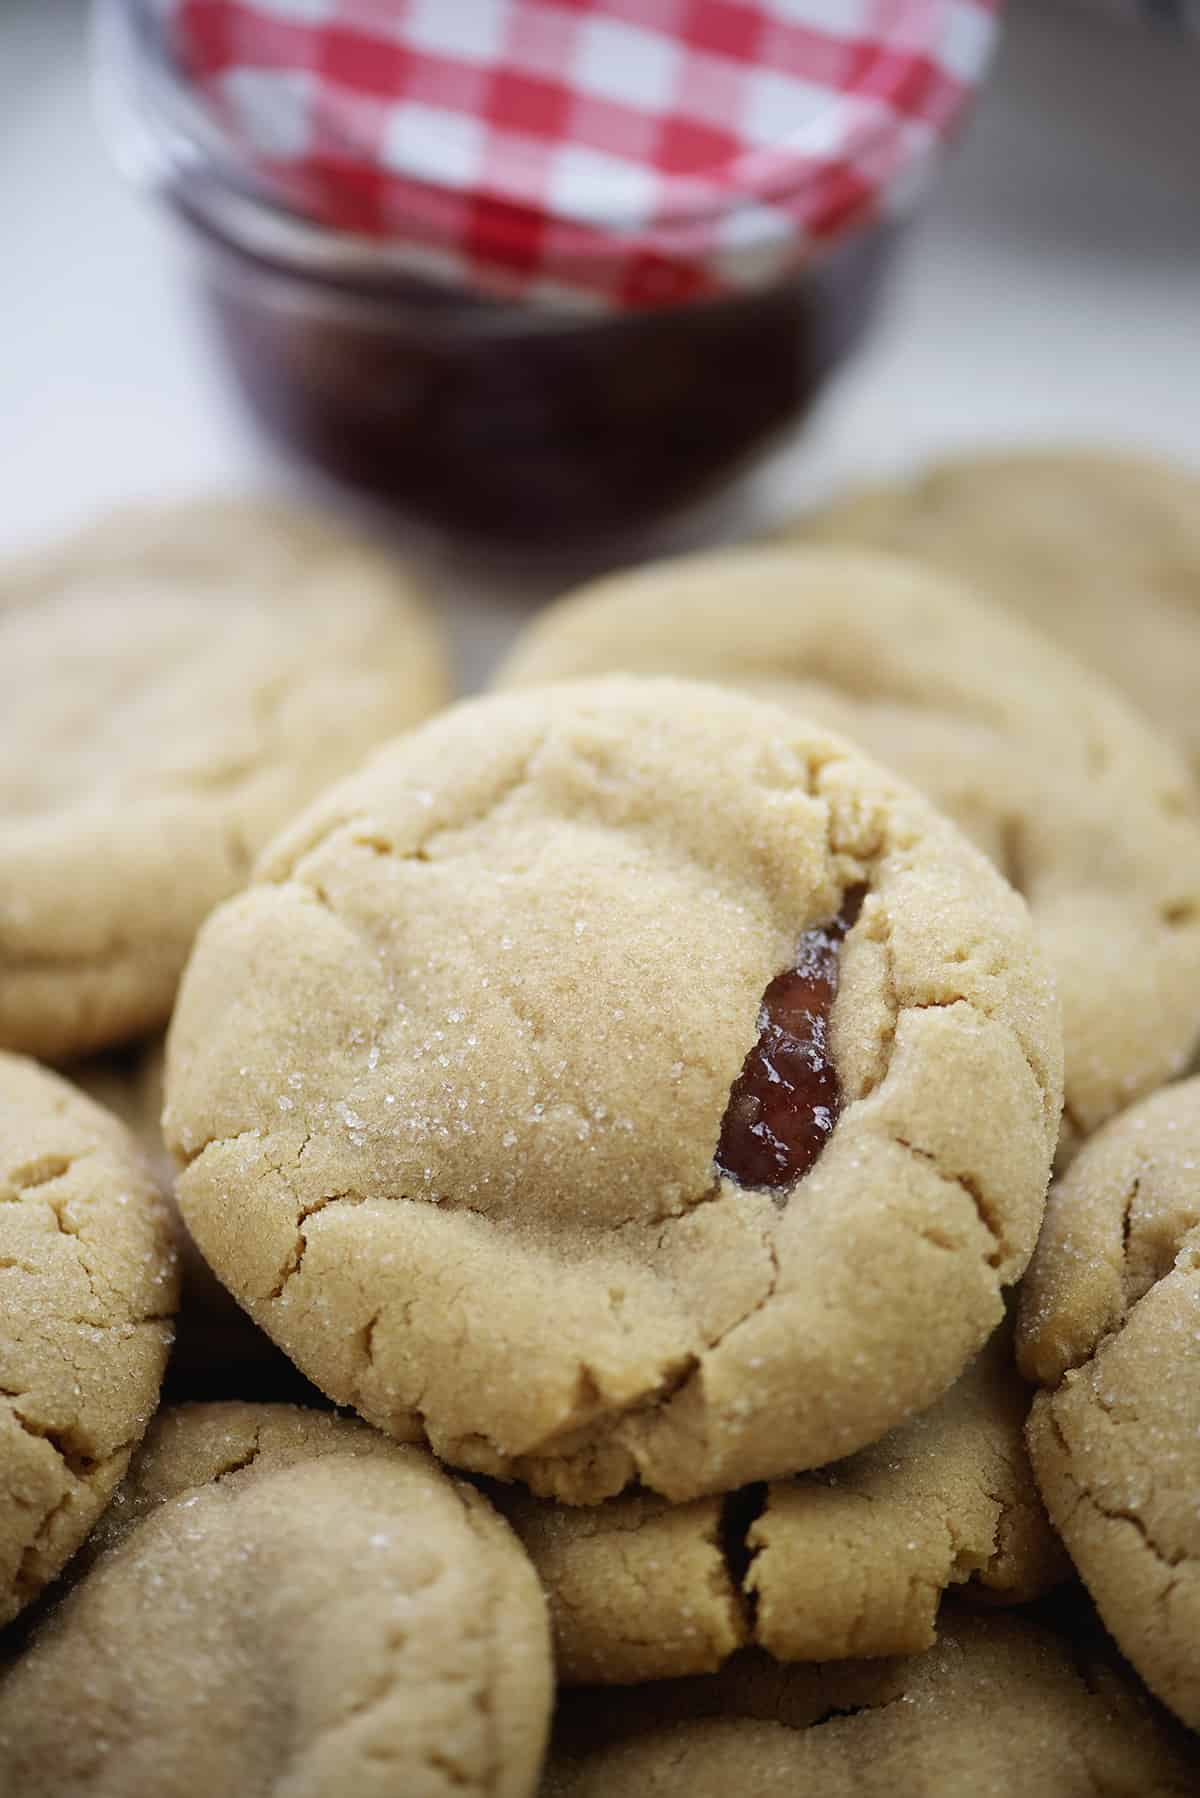 Baked peanut butter and jelly stuffed cookies piled on baking sheet.